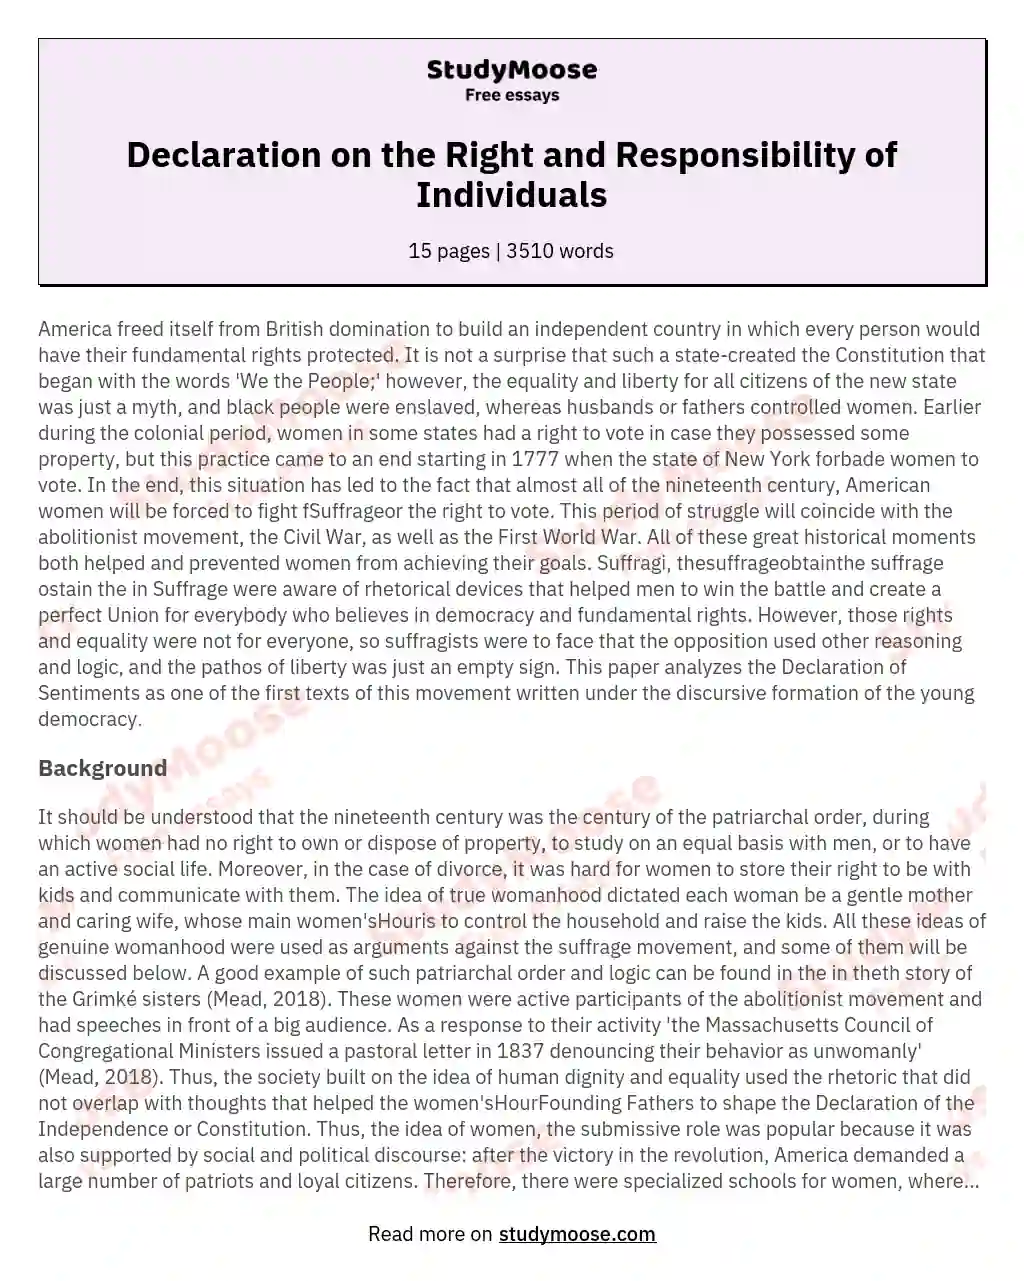 Declaration on the Right and Responsibility of Individuals essay